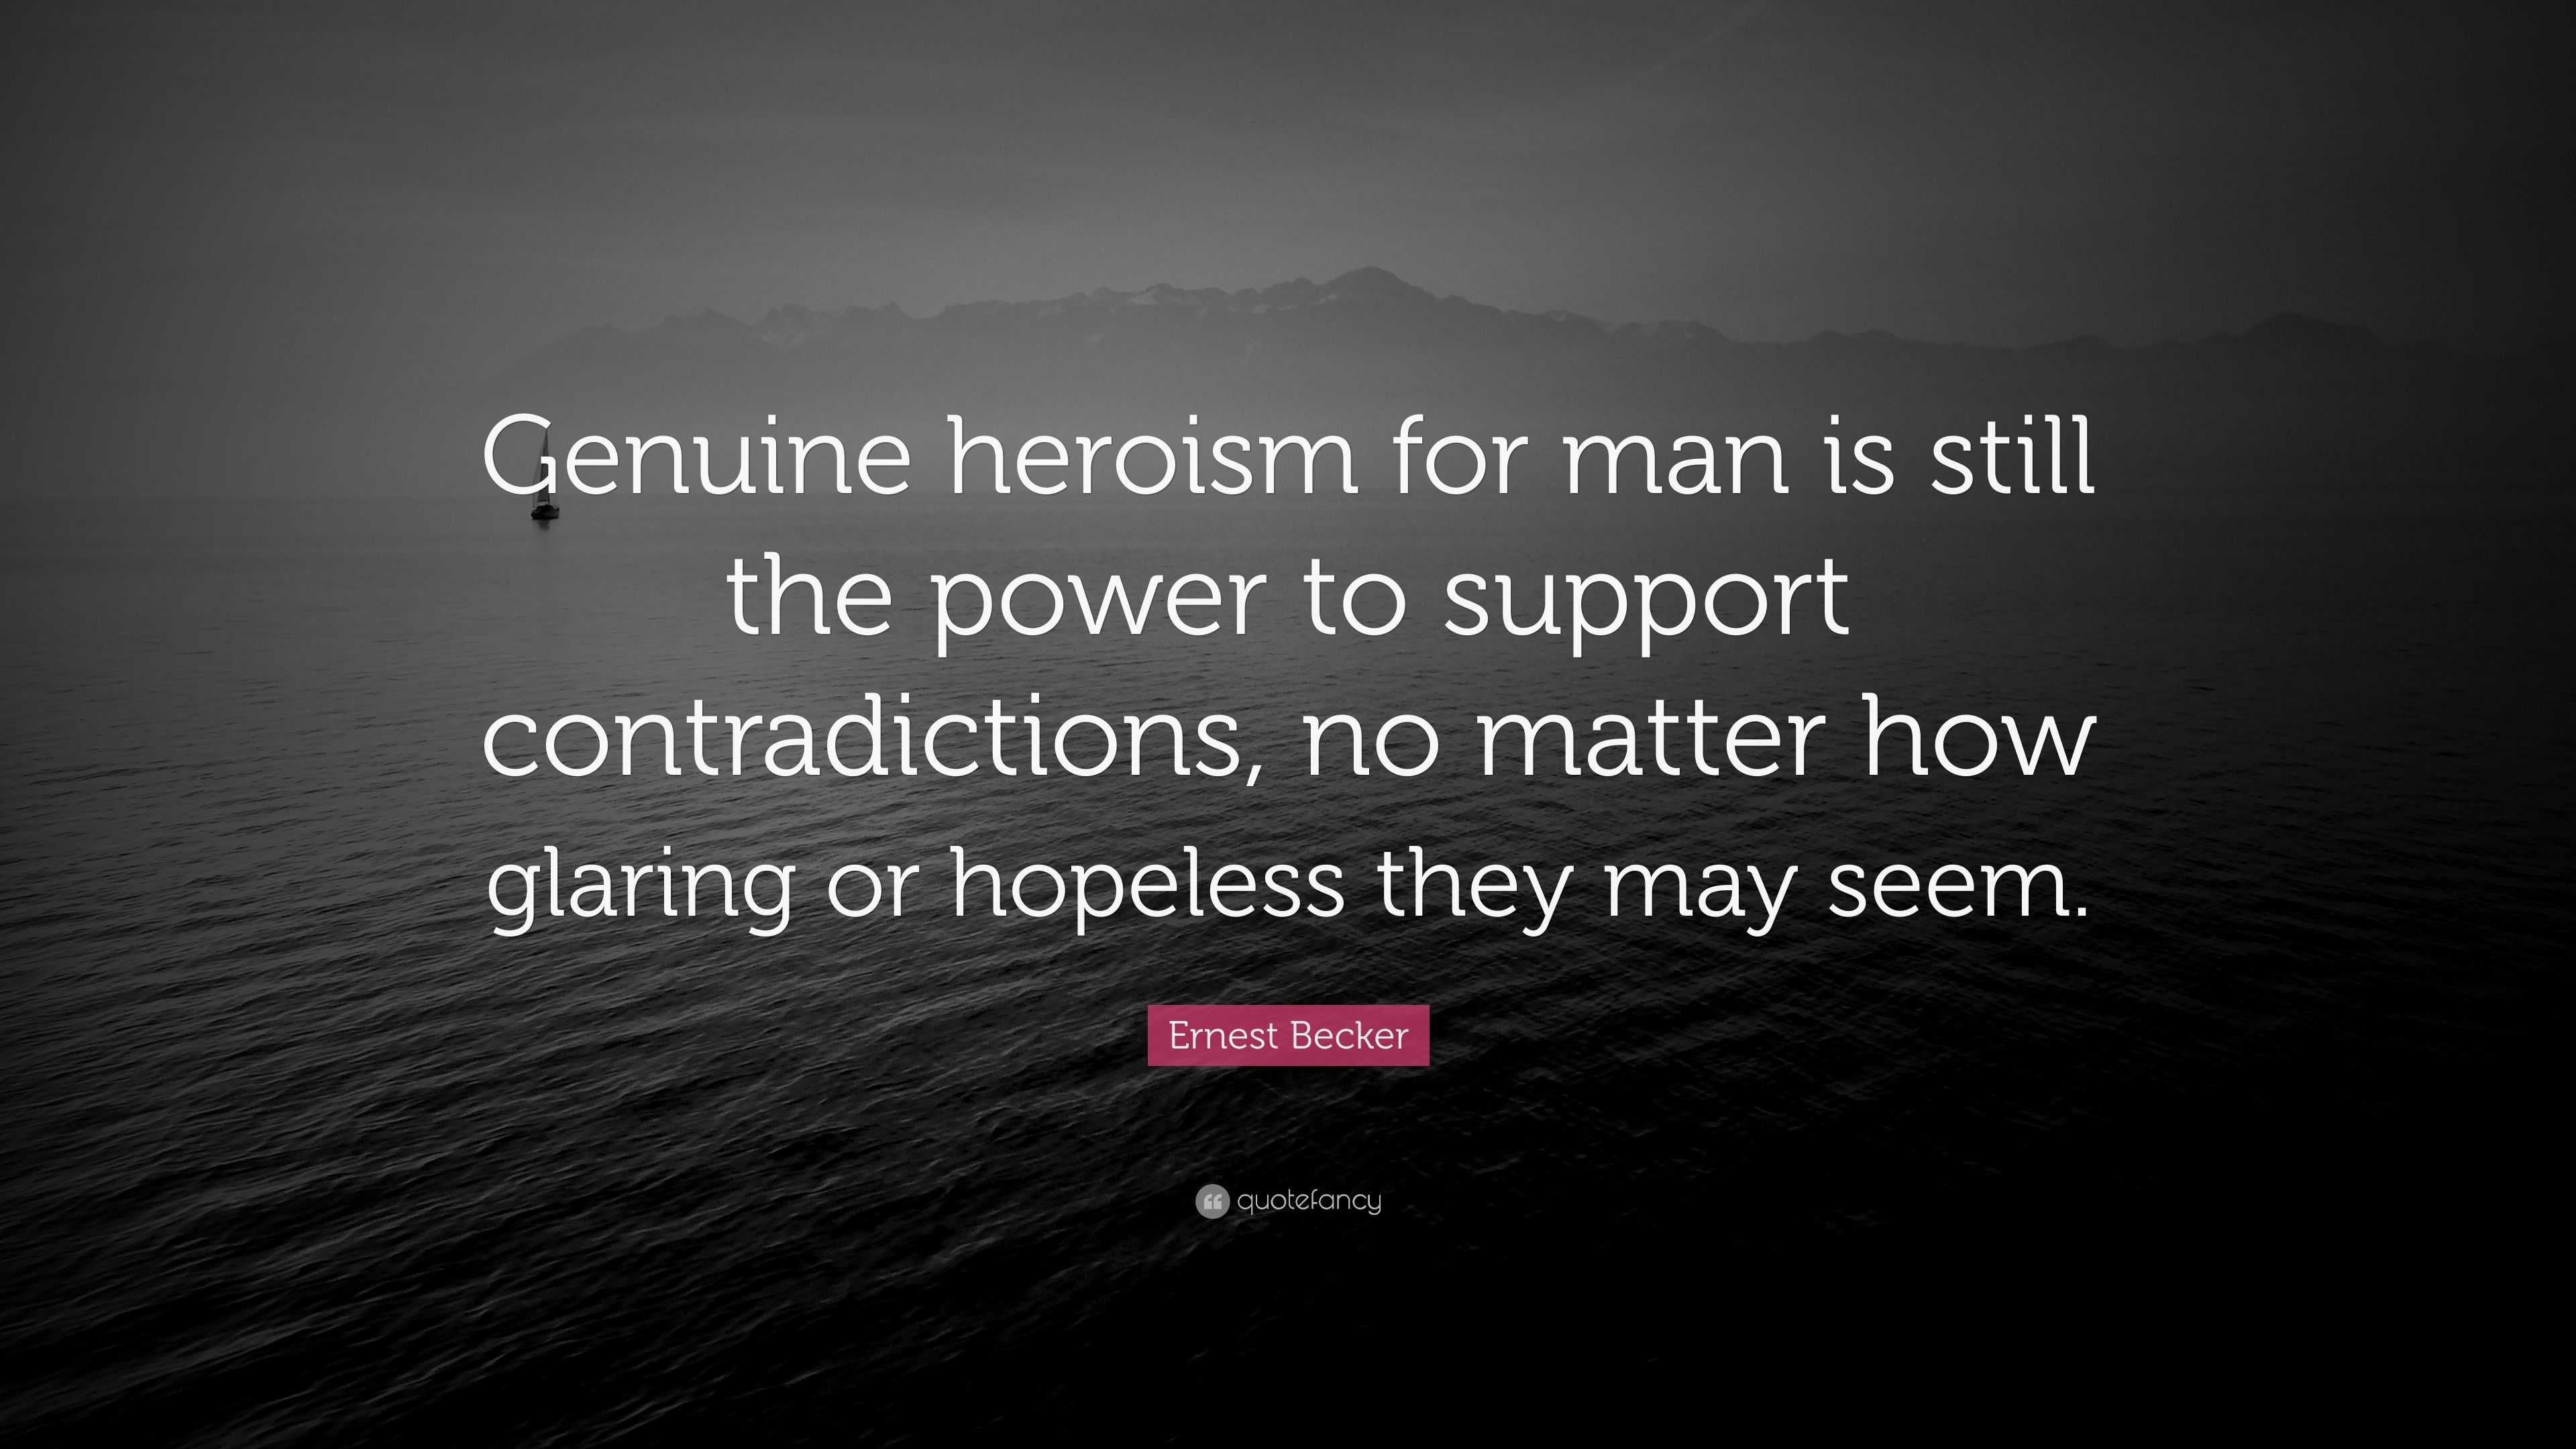 Ernest Becker Quote “genuine Heroism For Man Is Still The Power To Support Contradictions No